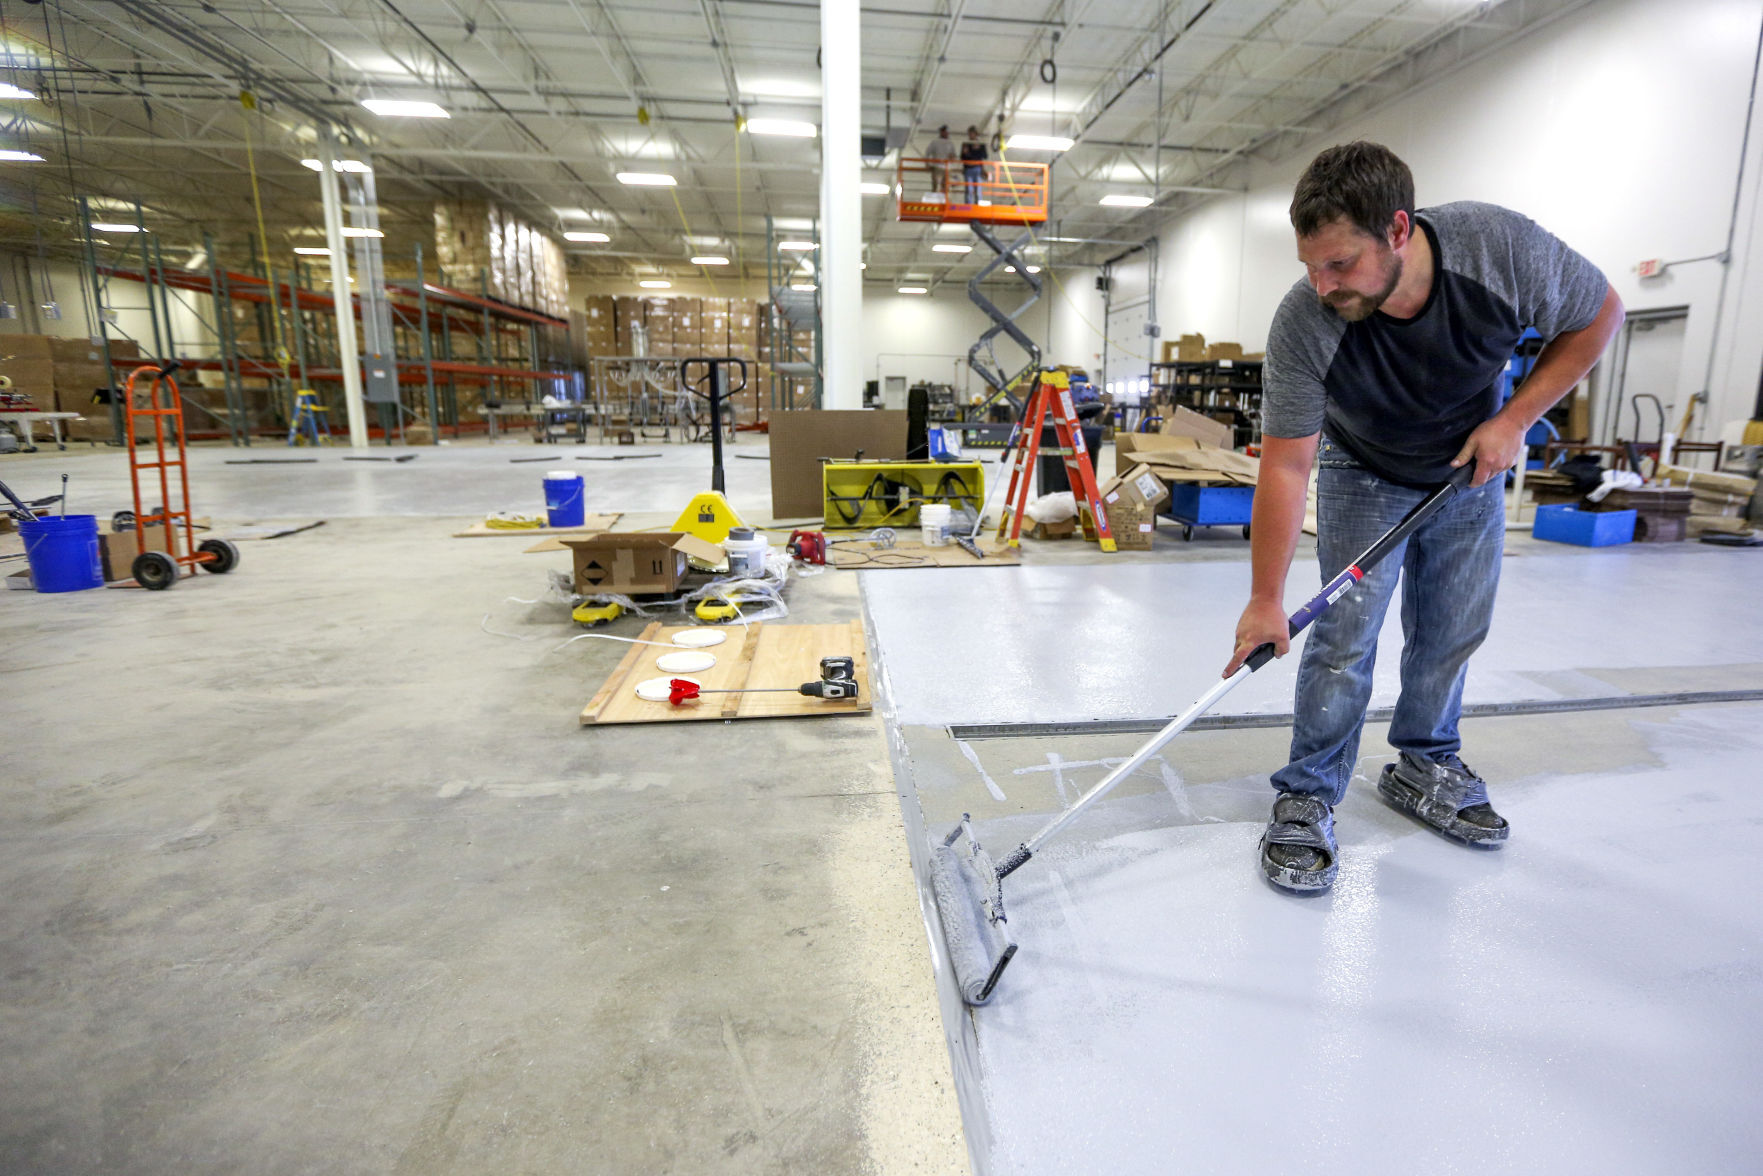 Lance Hummel, owner of Higley Industries Inc., seals the floor of his new building on Industrial Parkway Southwest in Dyersville, Iowa, on Thursday. The company has seen business booming during the pandemic. PHOTO CREDIT: Dave Kettering